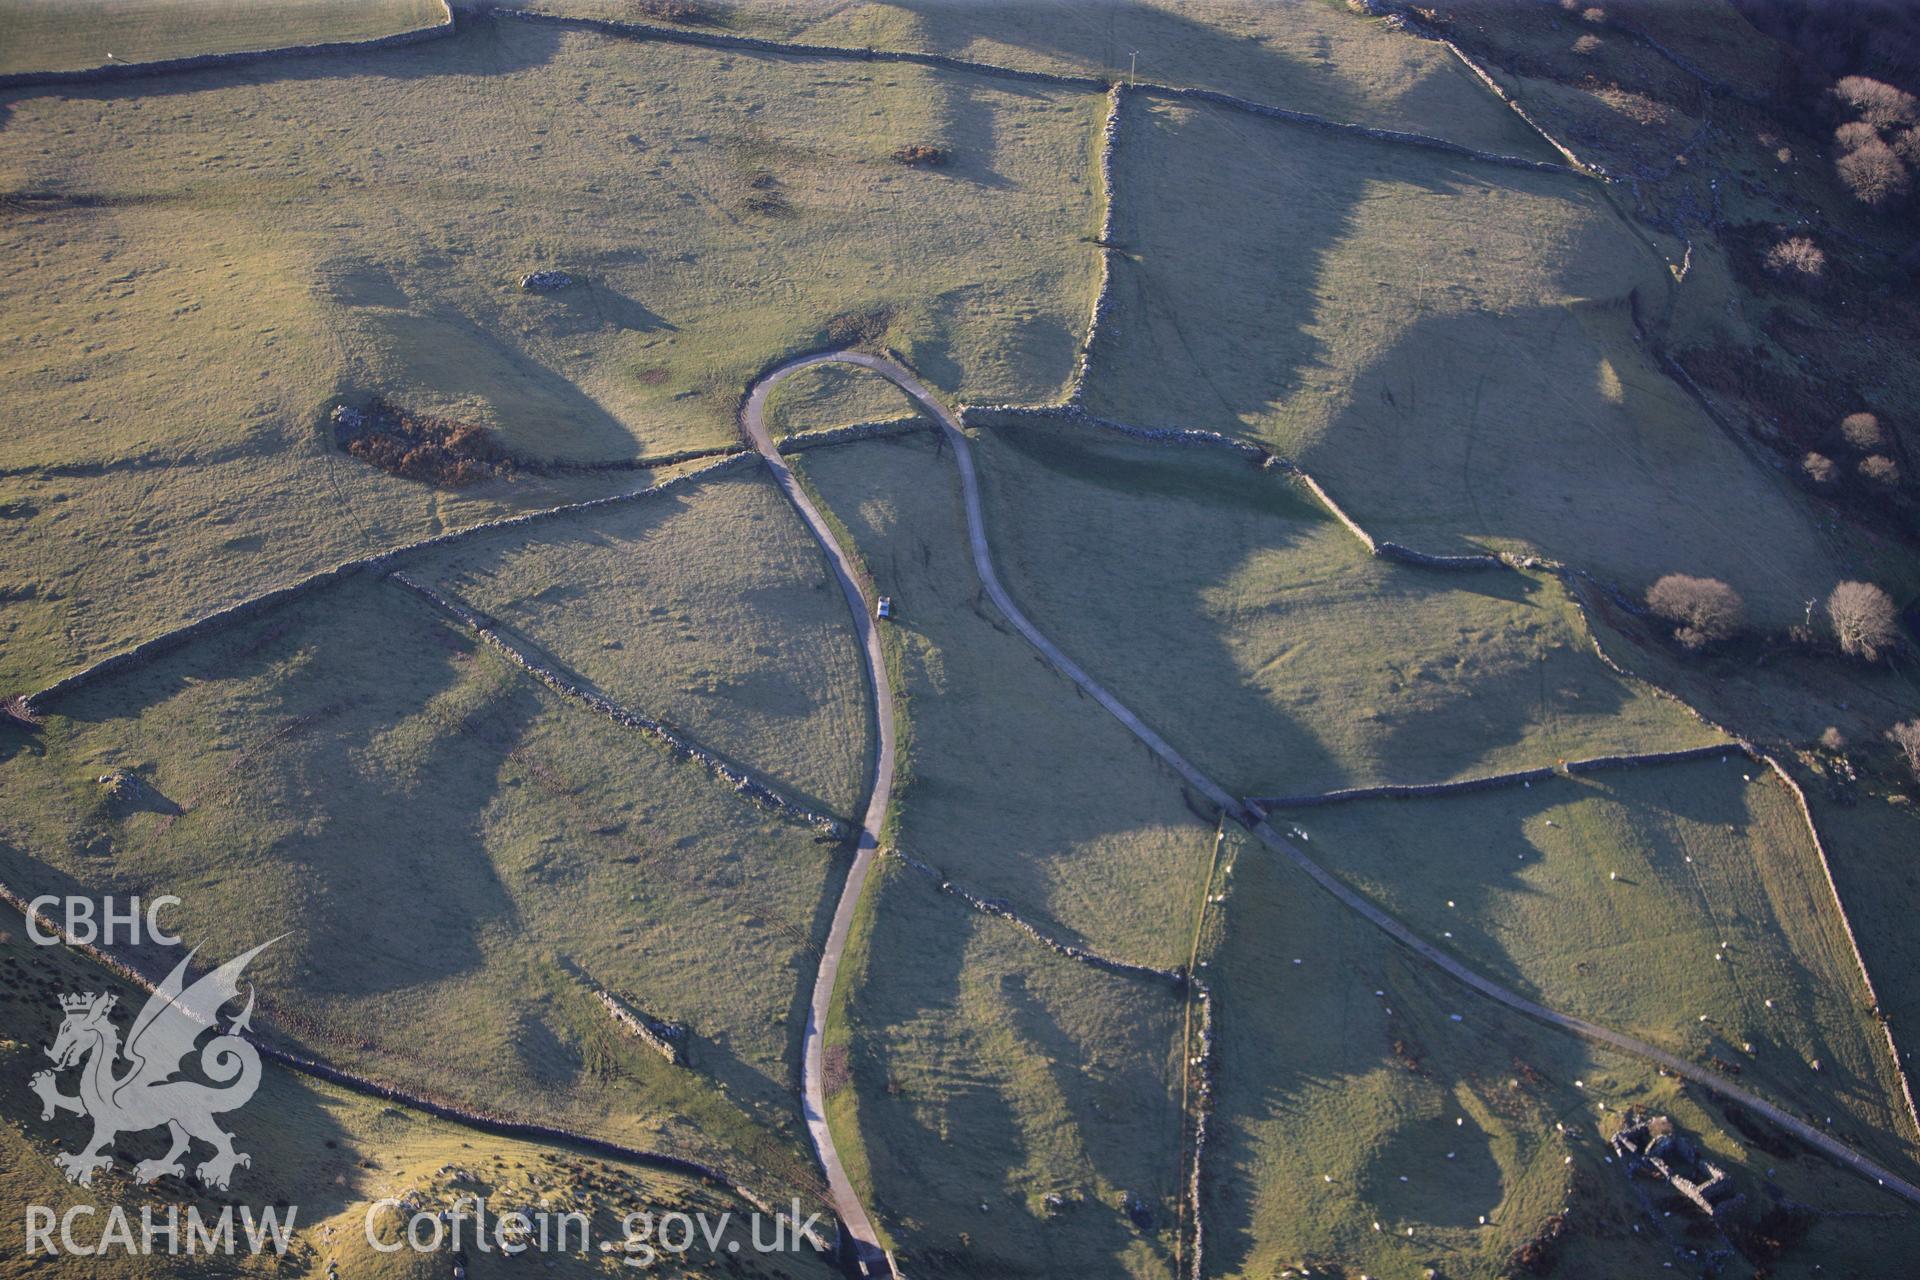 RCAHMW colour oblique photograph of Erw Wen, circular hut circle and field system. Taken by Toby Driver on 10/12/2012.